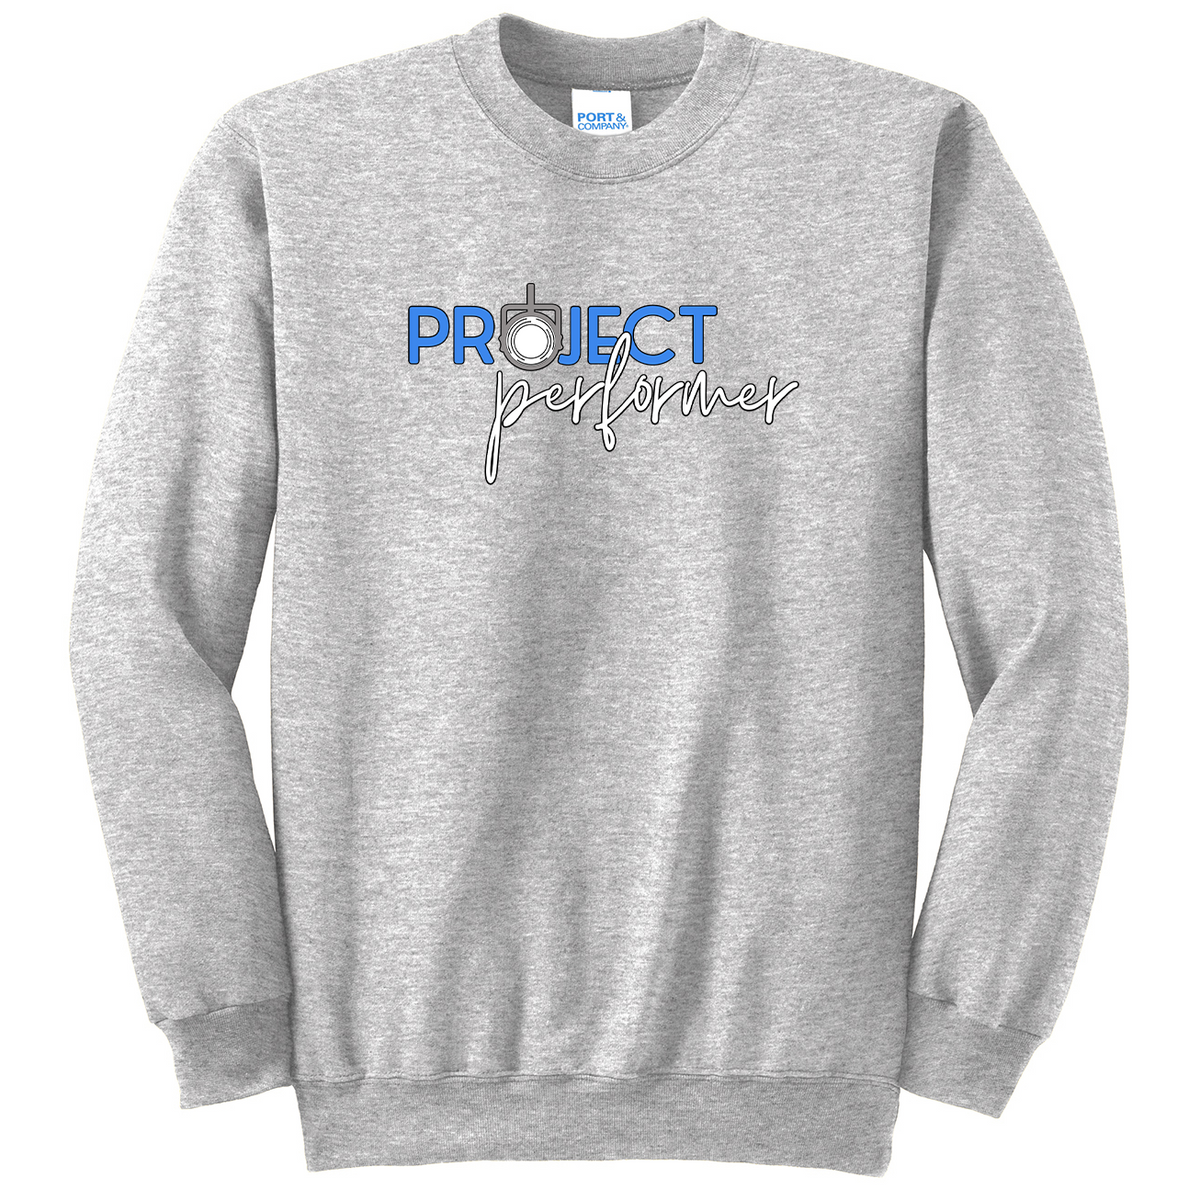 Project Performer Crew Neck Sweater